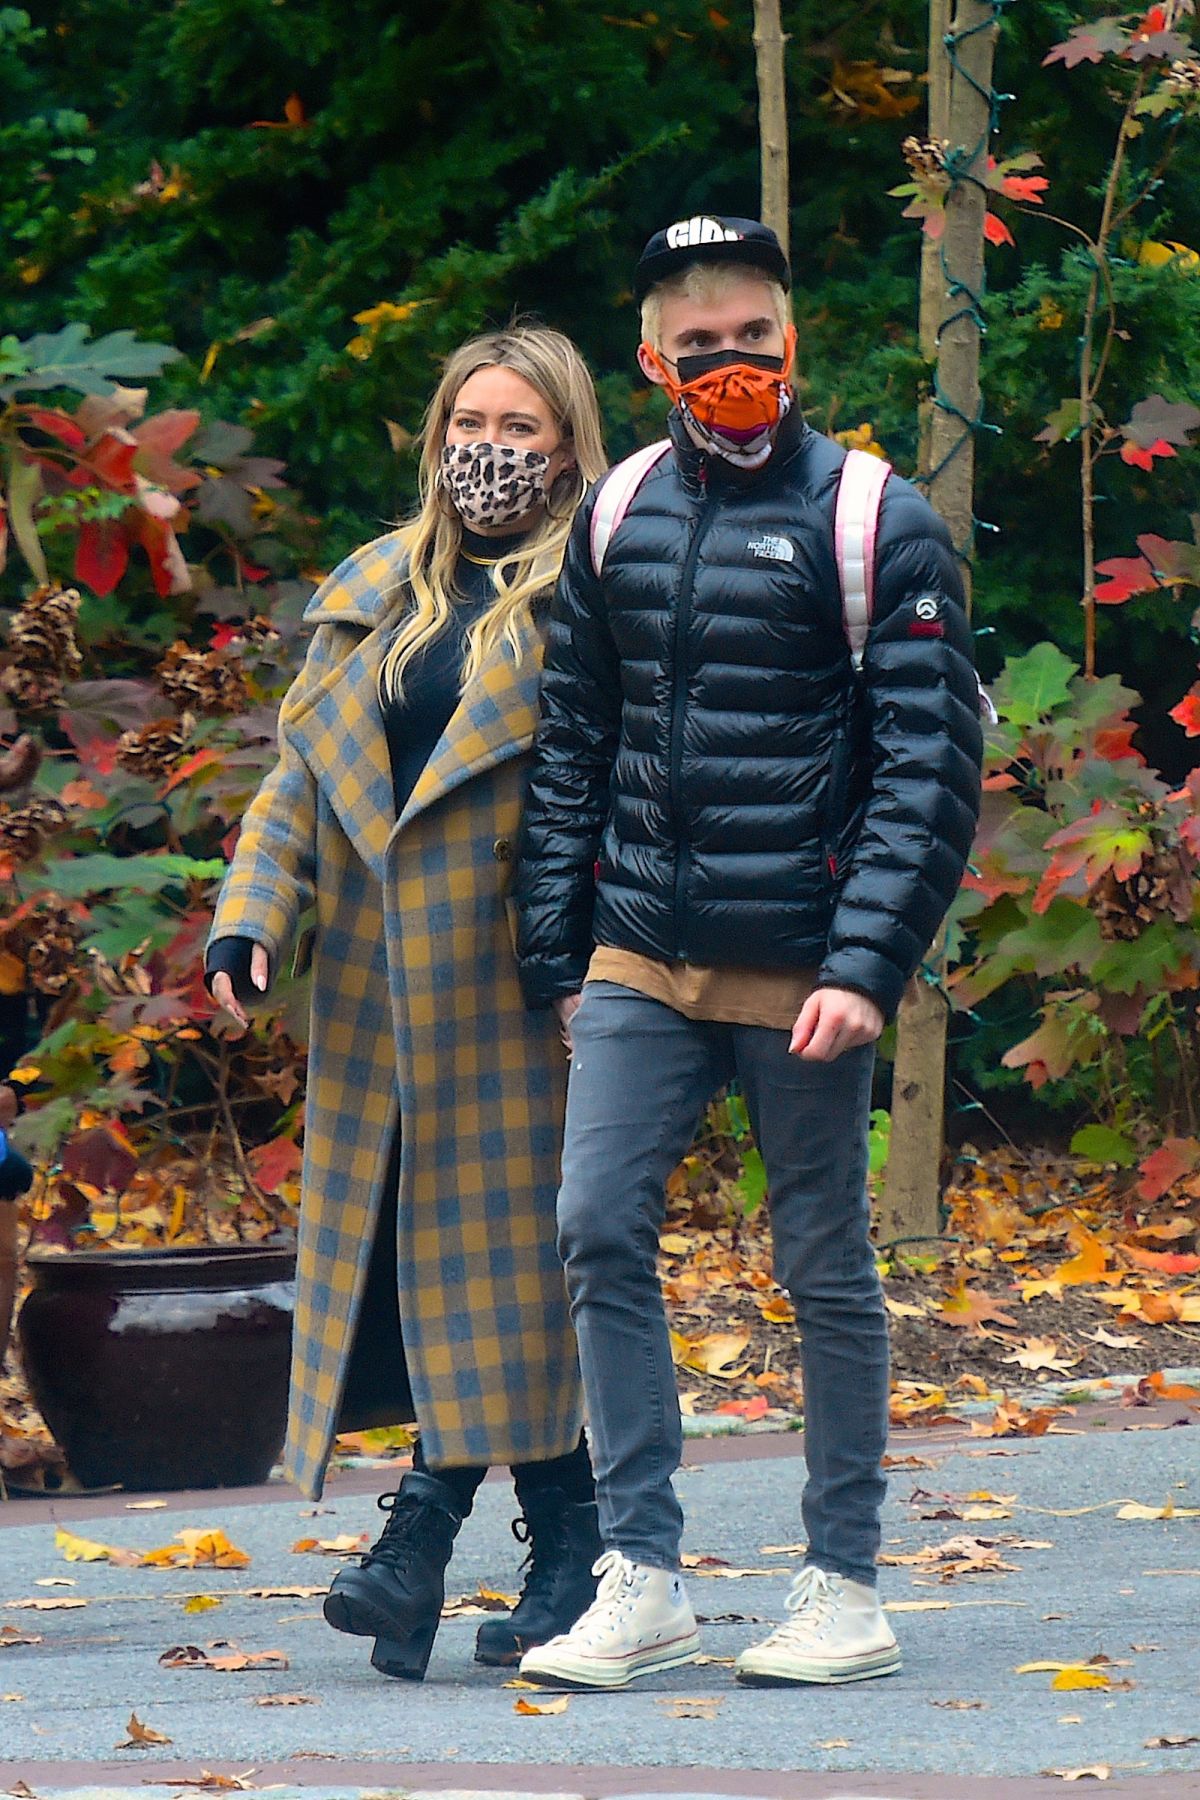 hilary-duff-out-with-her-family-at-bronx-zoo-in-new-york-11-15-2020-5.jpg